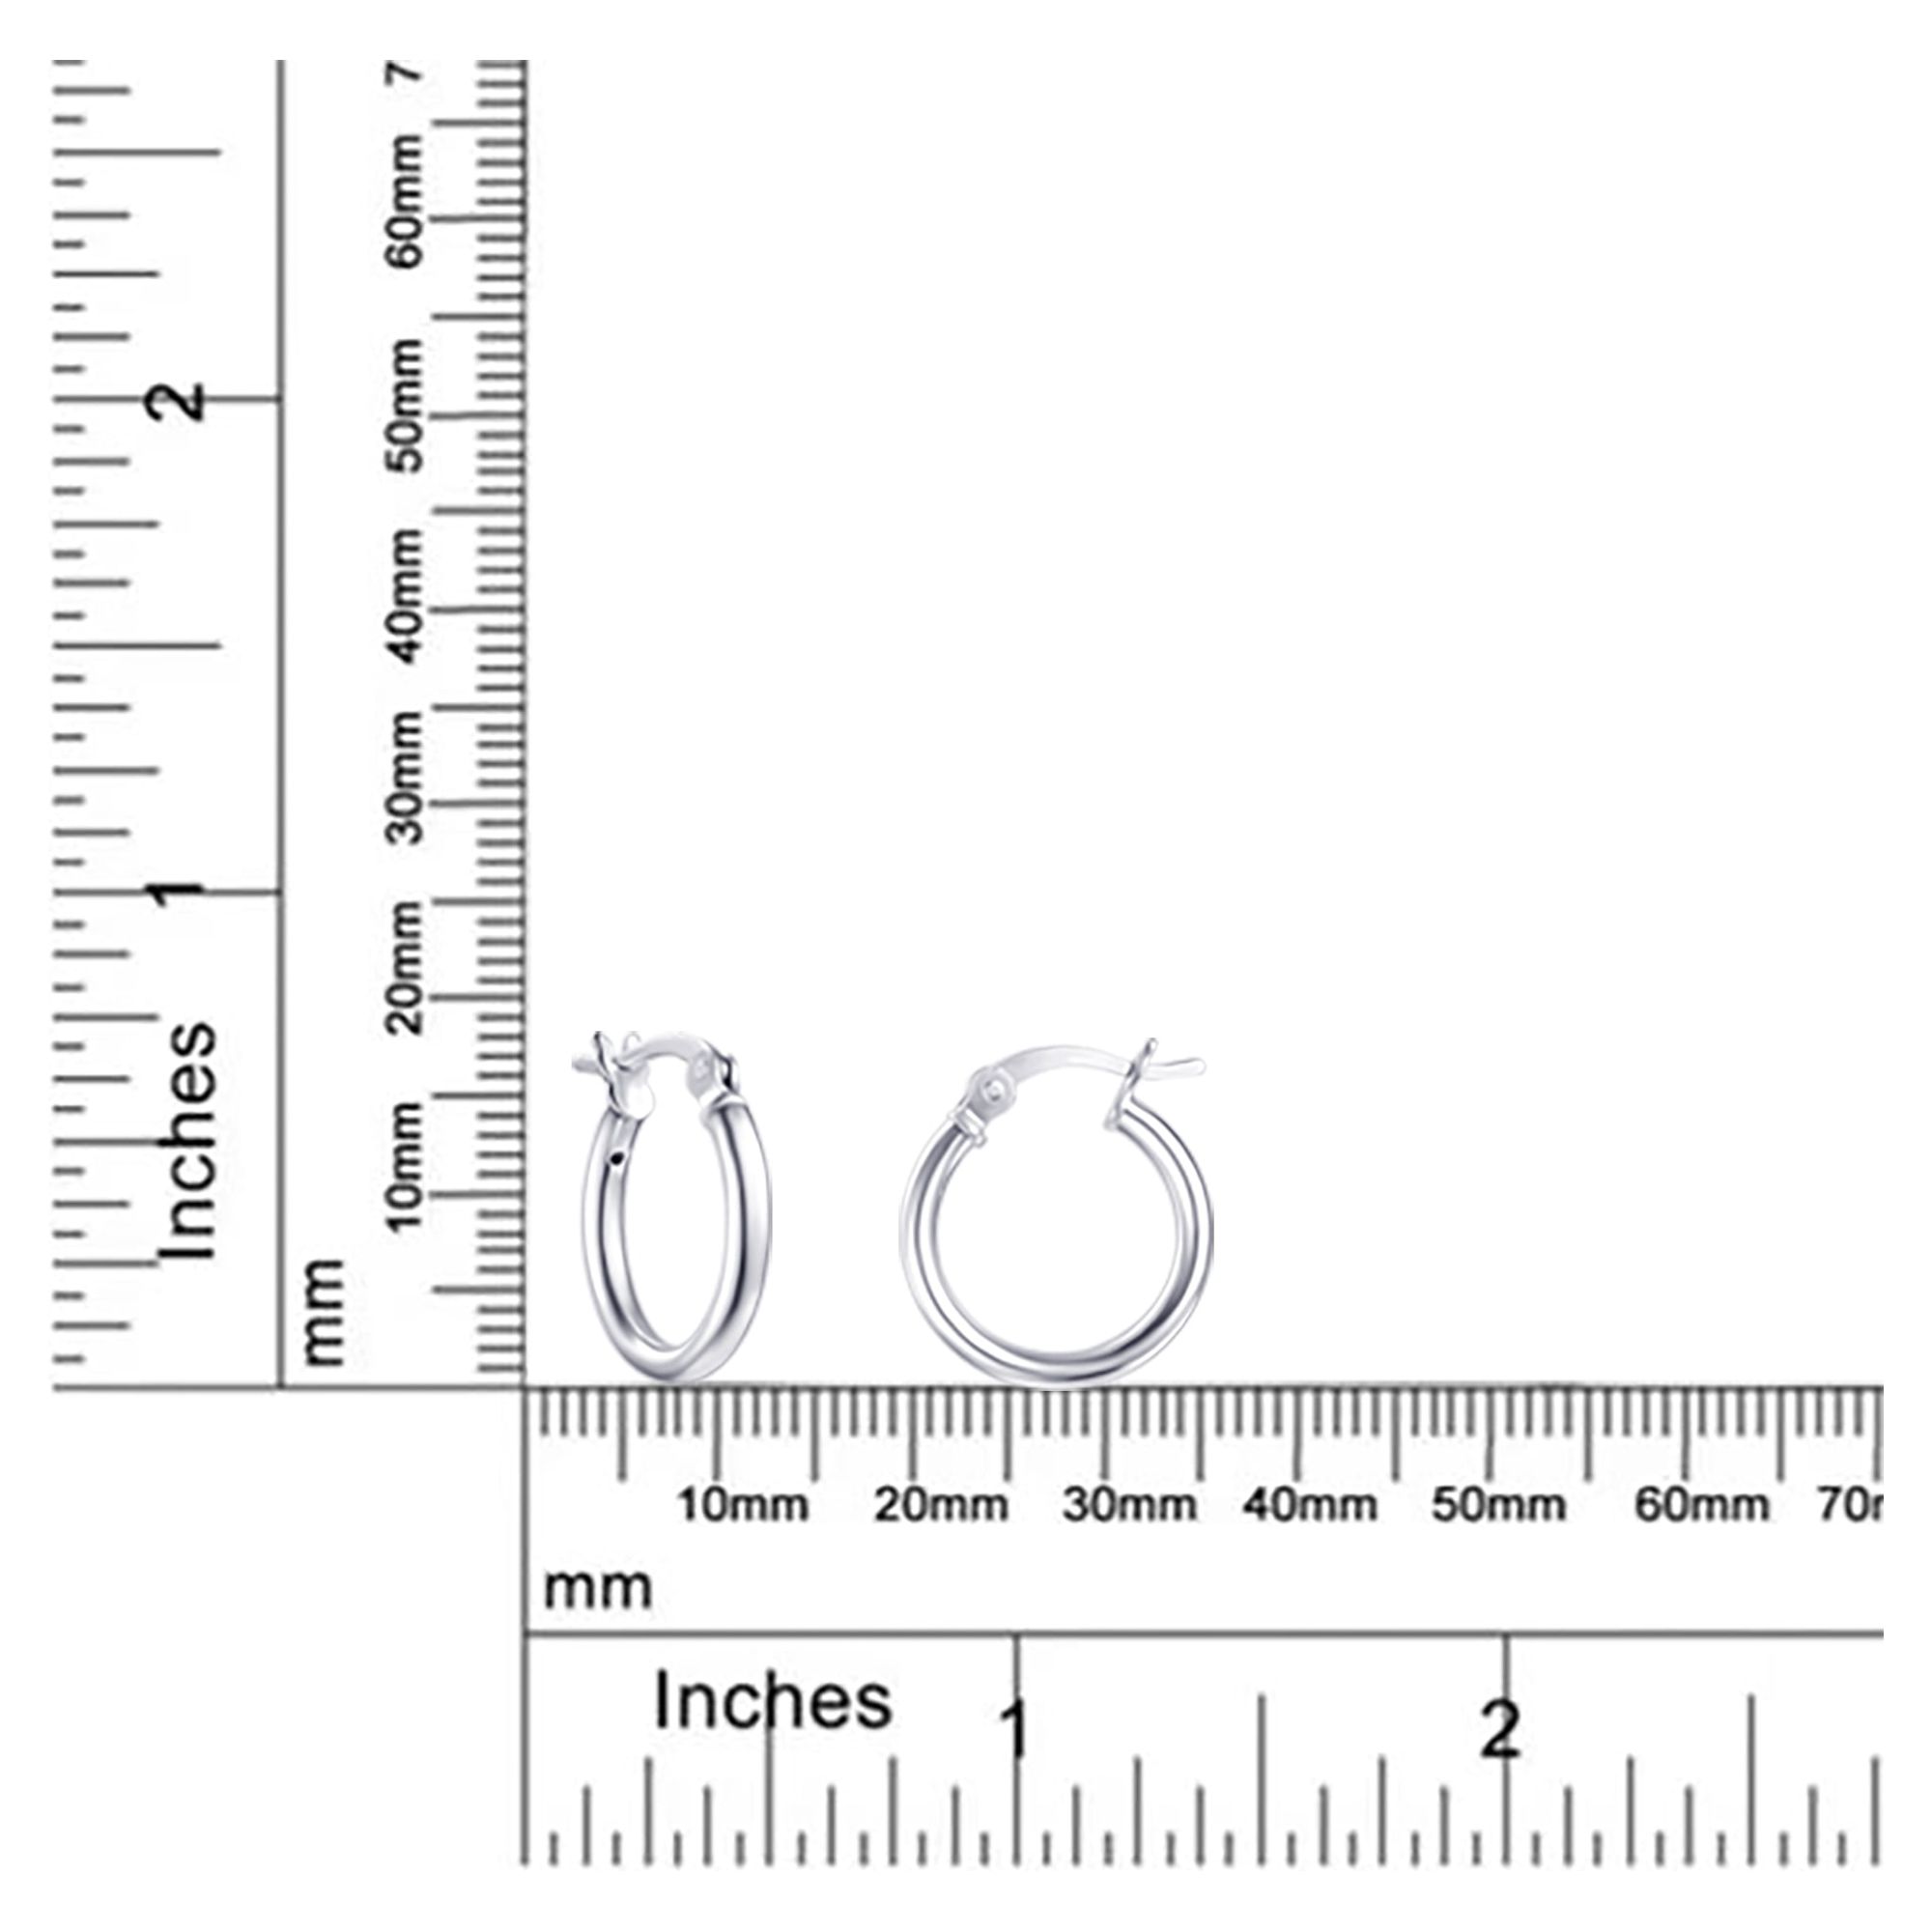 Brilliance Fine Jewelry Click Top Hoop Earrings in Sterling Silver 15MM - image 5 of 5